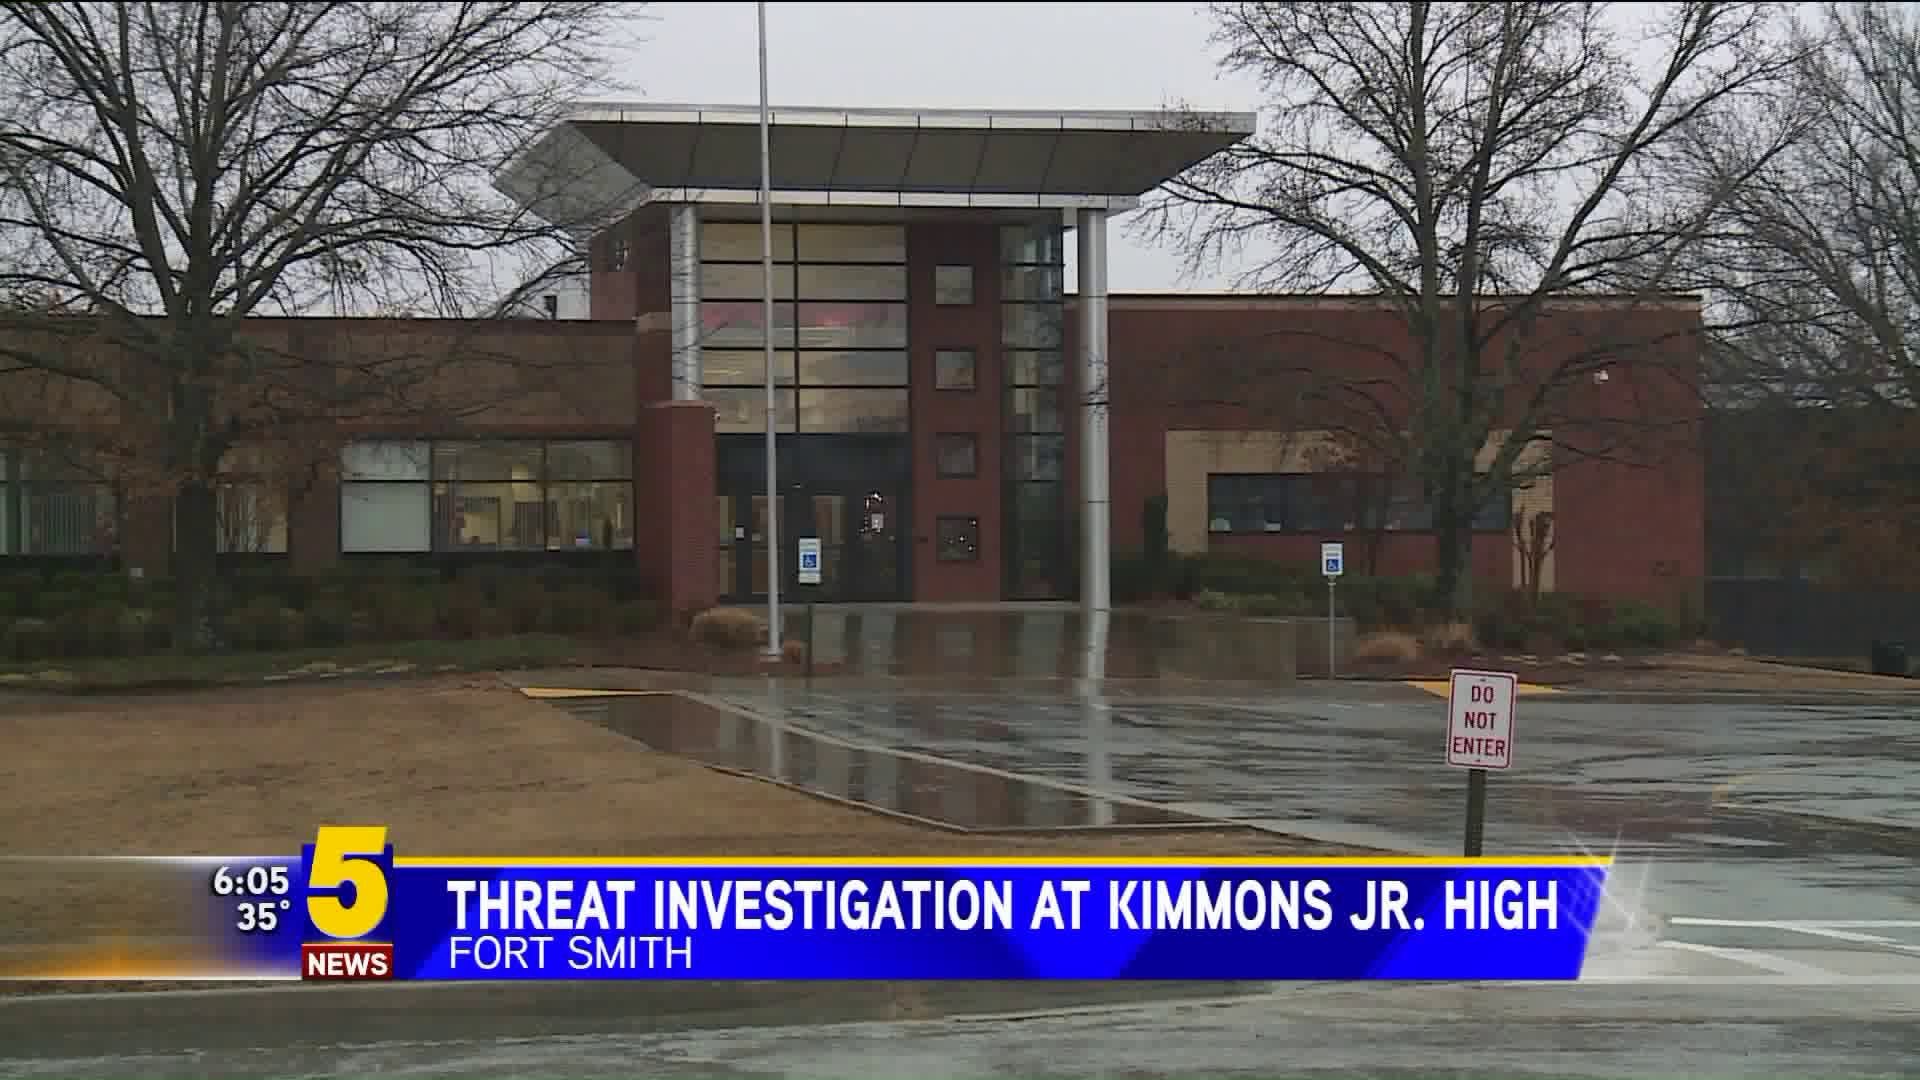 Threat Investigation at Kimmons Jr. High in Fort Smith